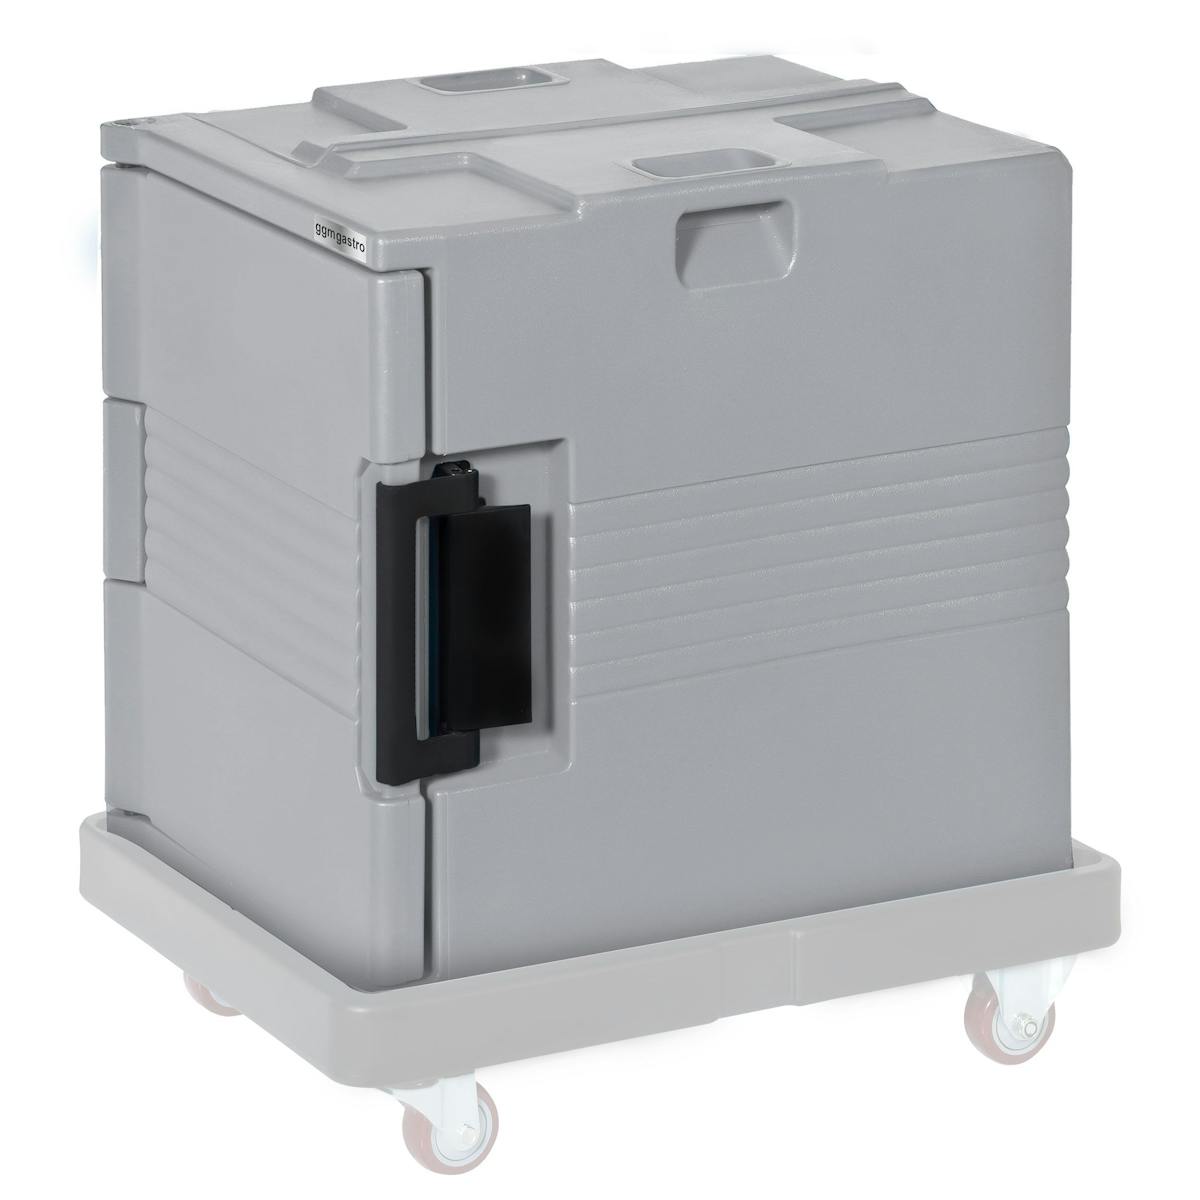 Thermobox - 58 litres | Insulated box| Keep warm box